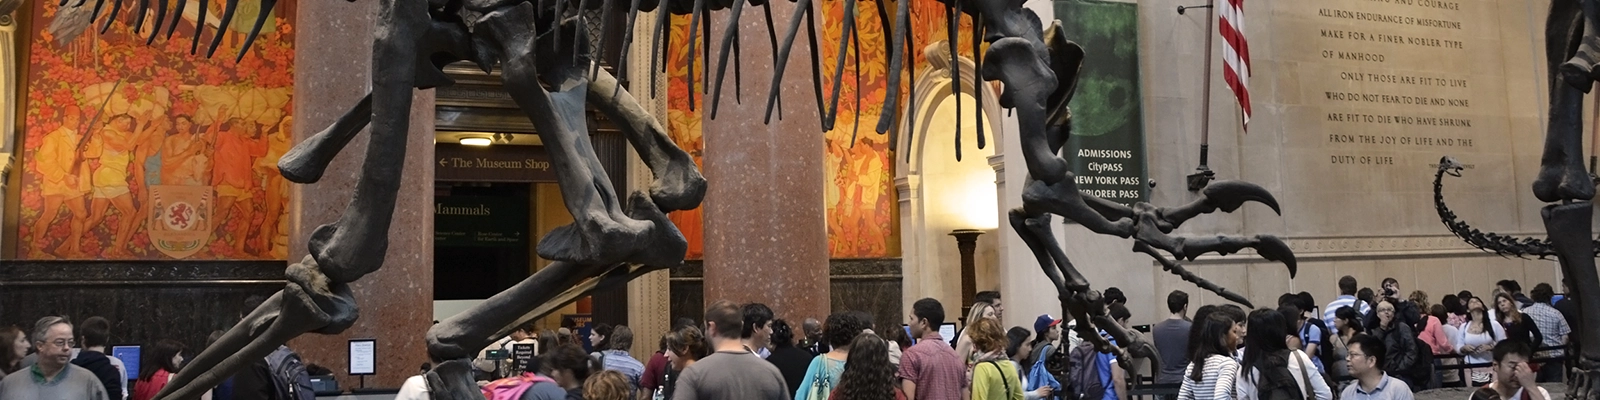 American Museum of Natural History - interior view with exhibits and visitors exploring the vast collections related to nature, science, and human cultures.